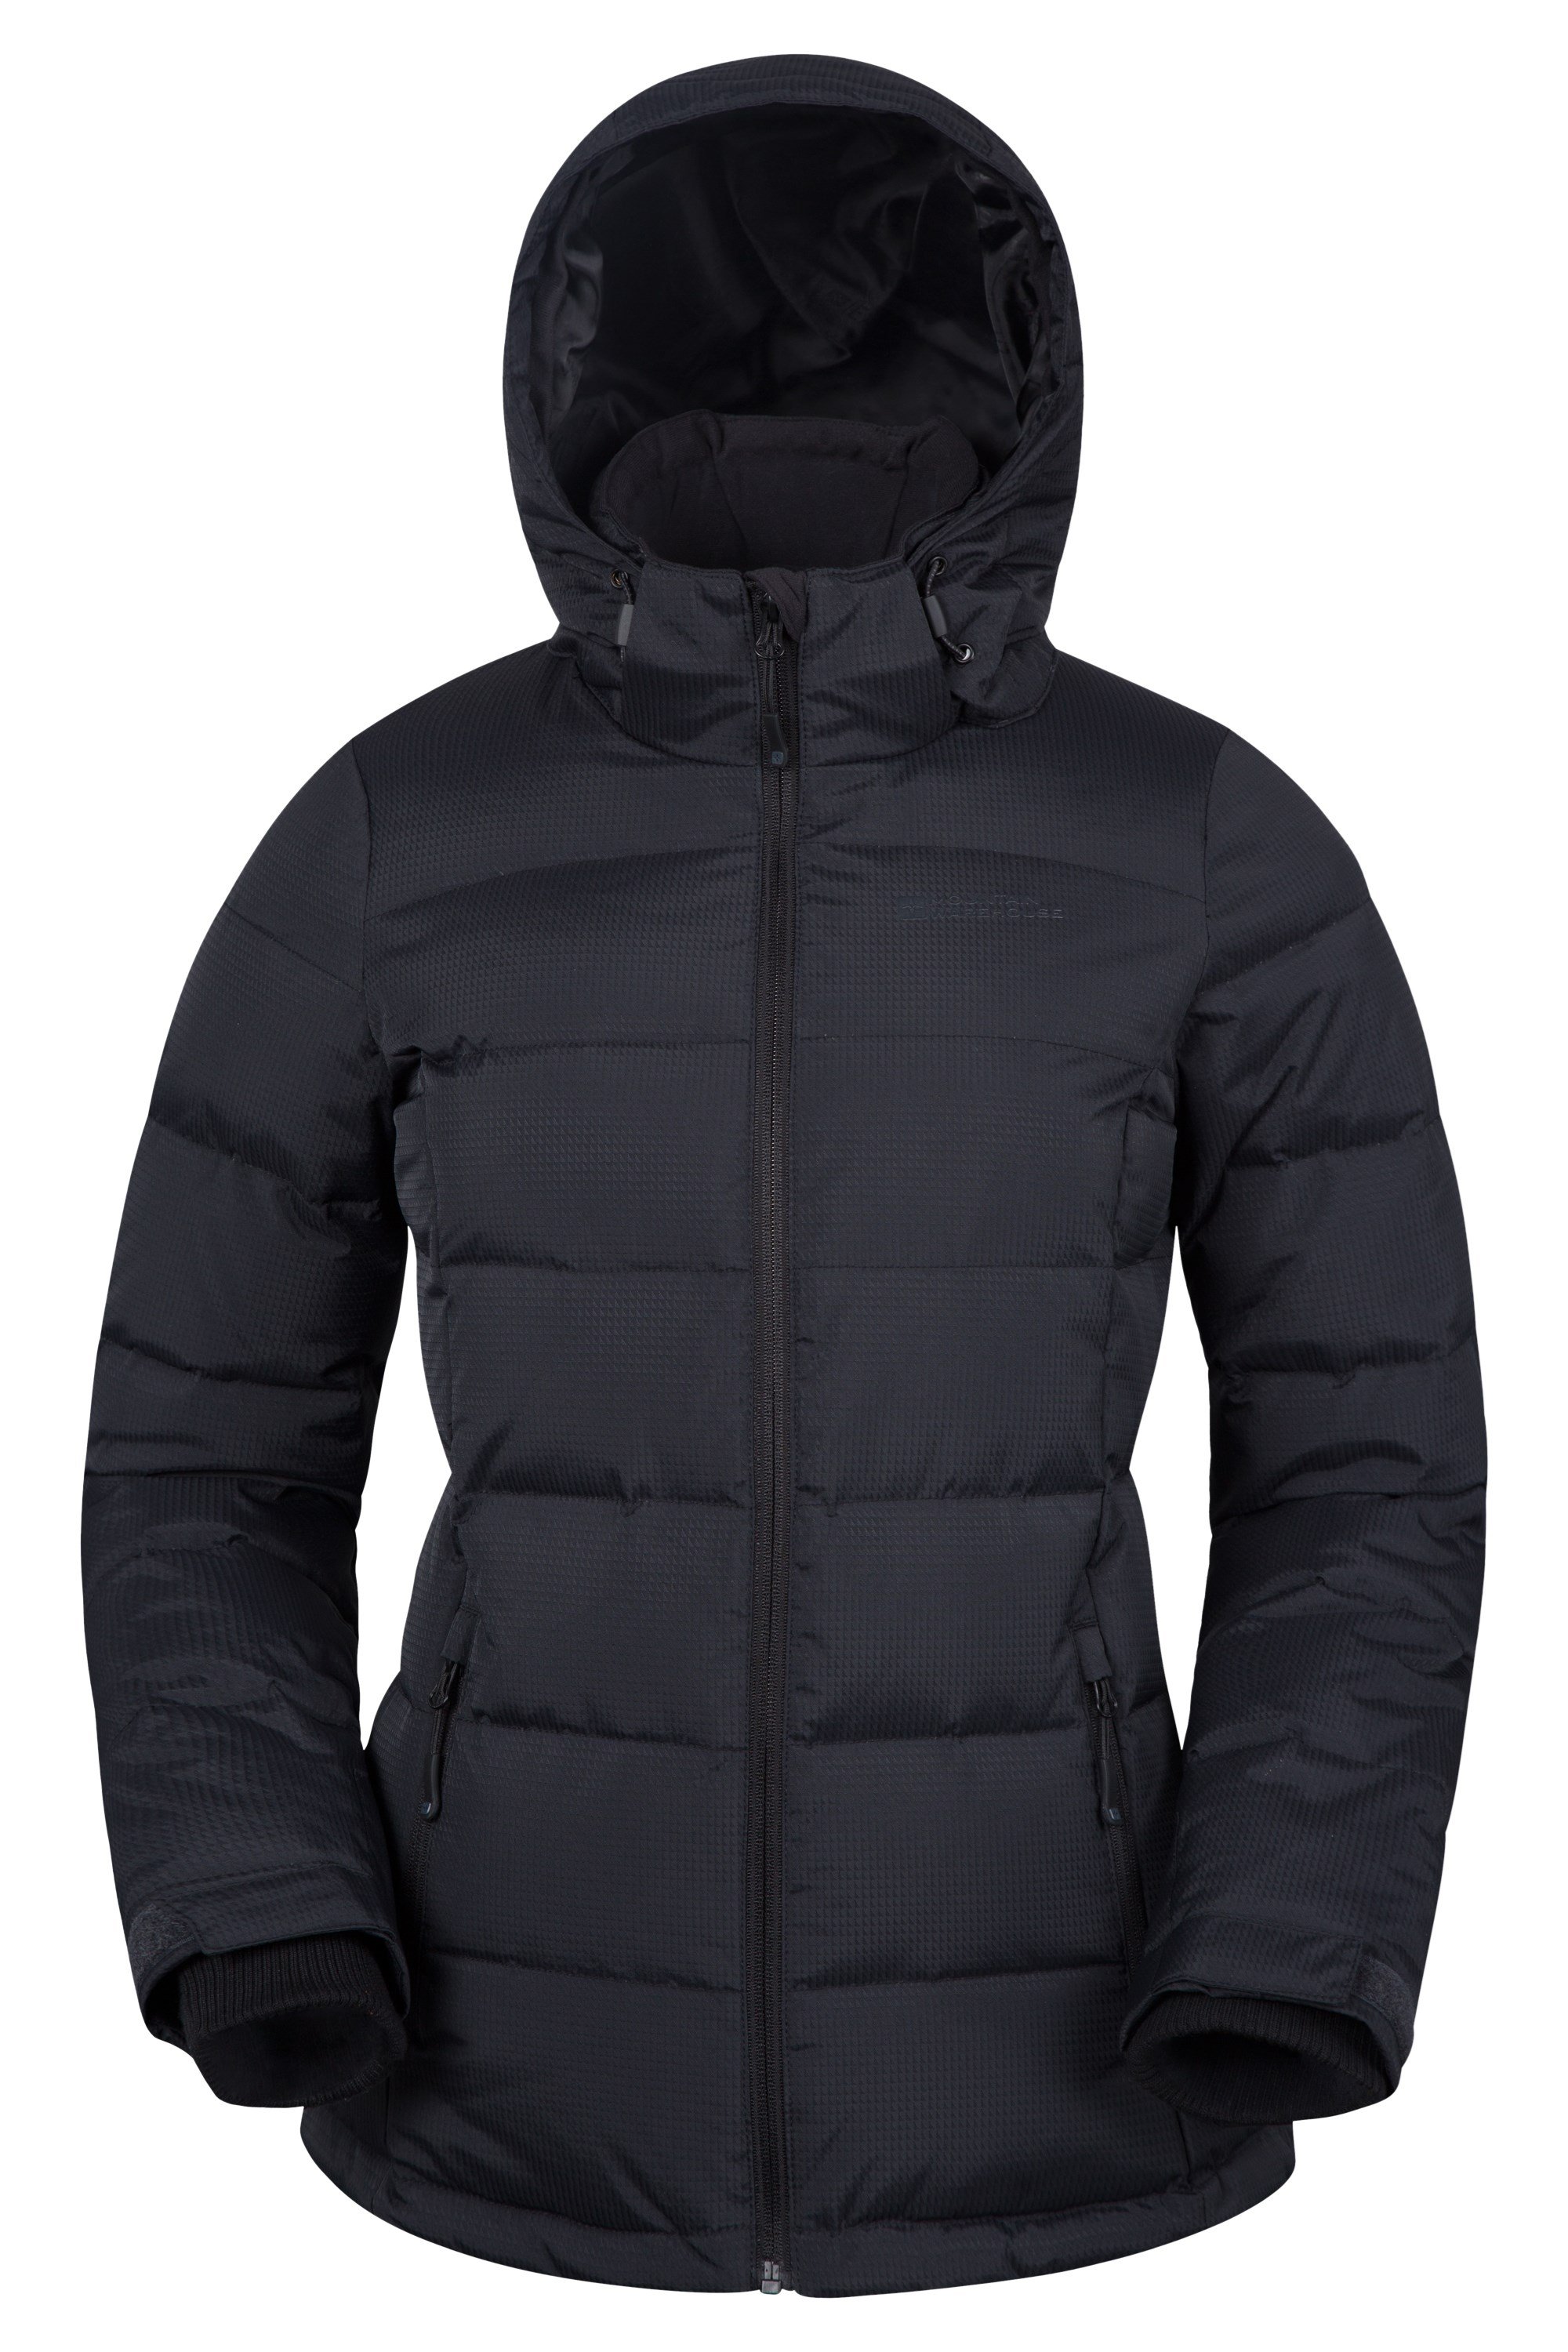 Womens Padded & Insulated Jackets | Mountain Warehouse US